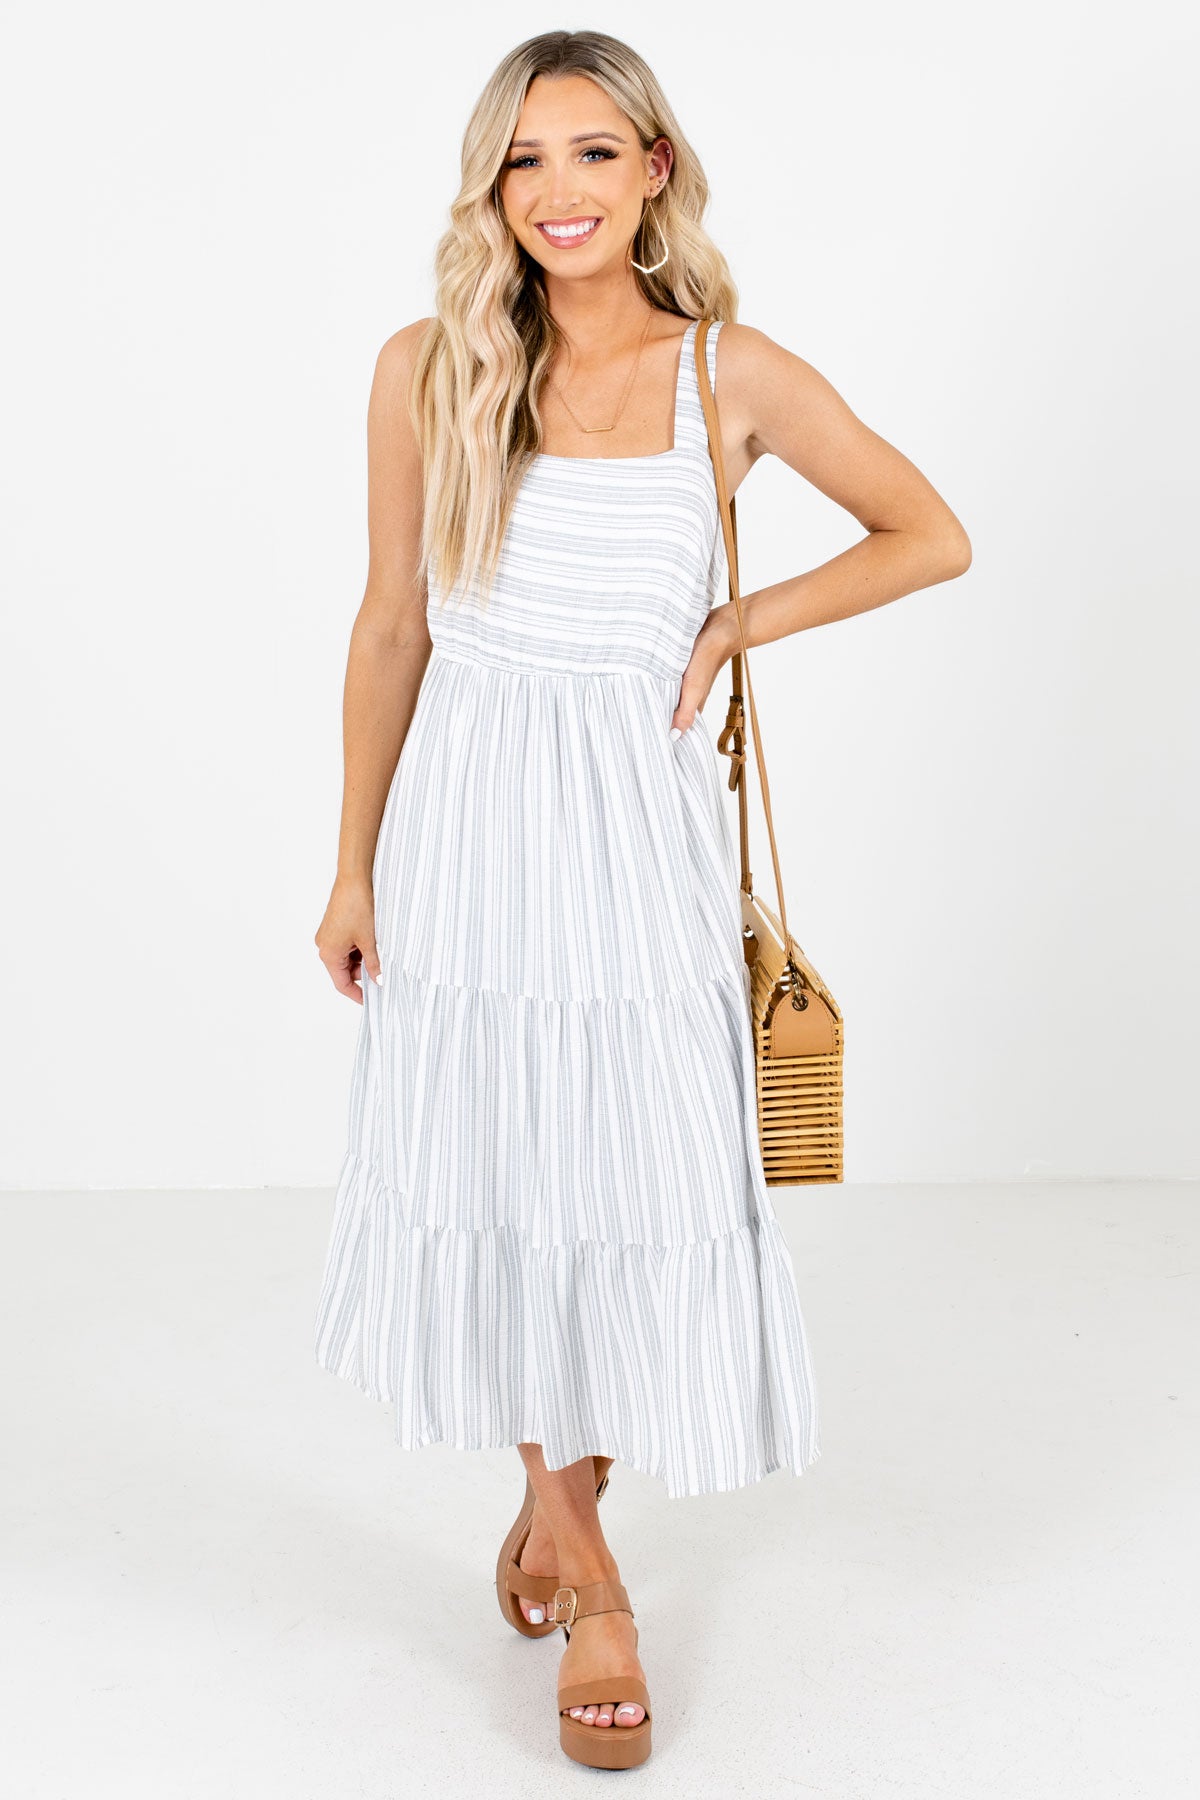 Blue and White Striped Patterned Boutique Midi Dresses for Women